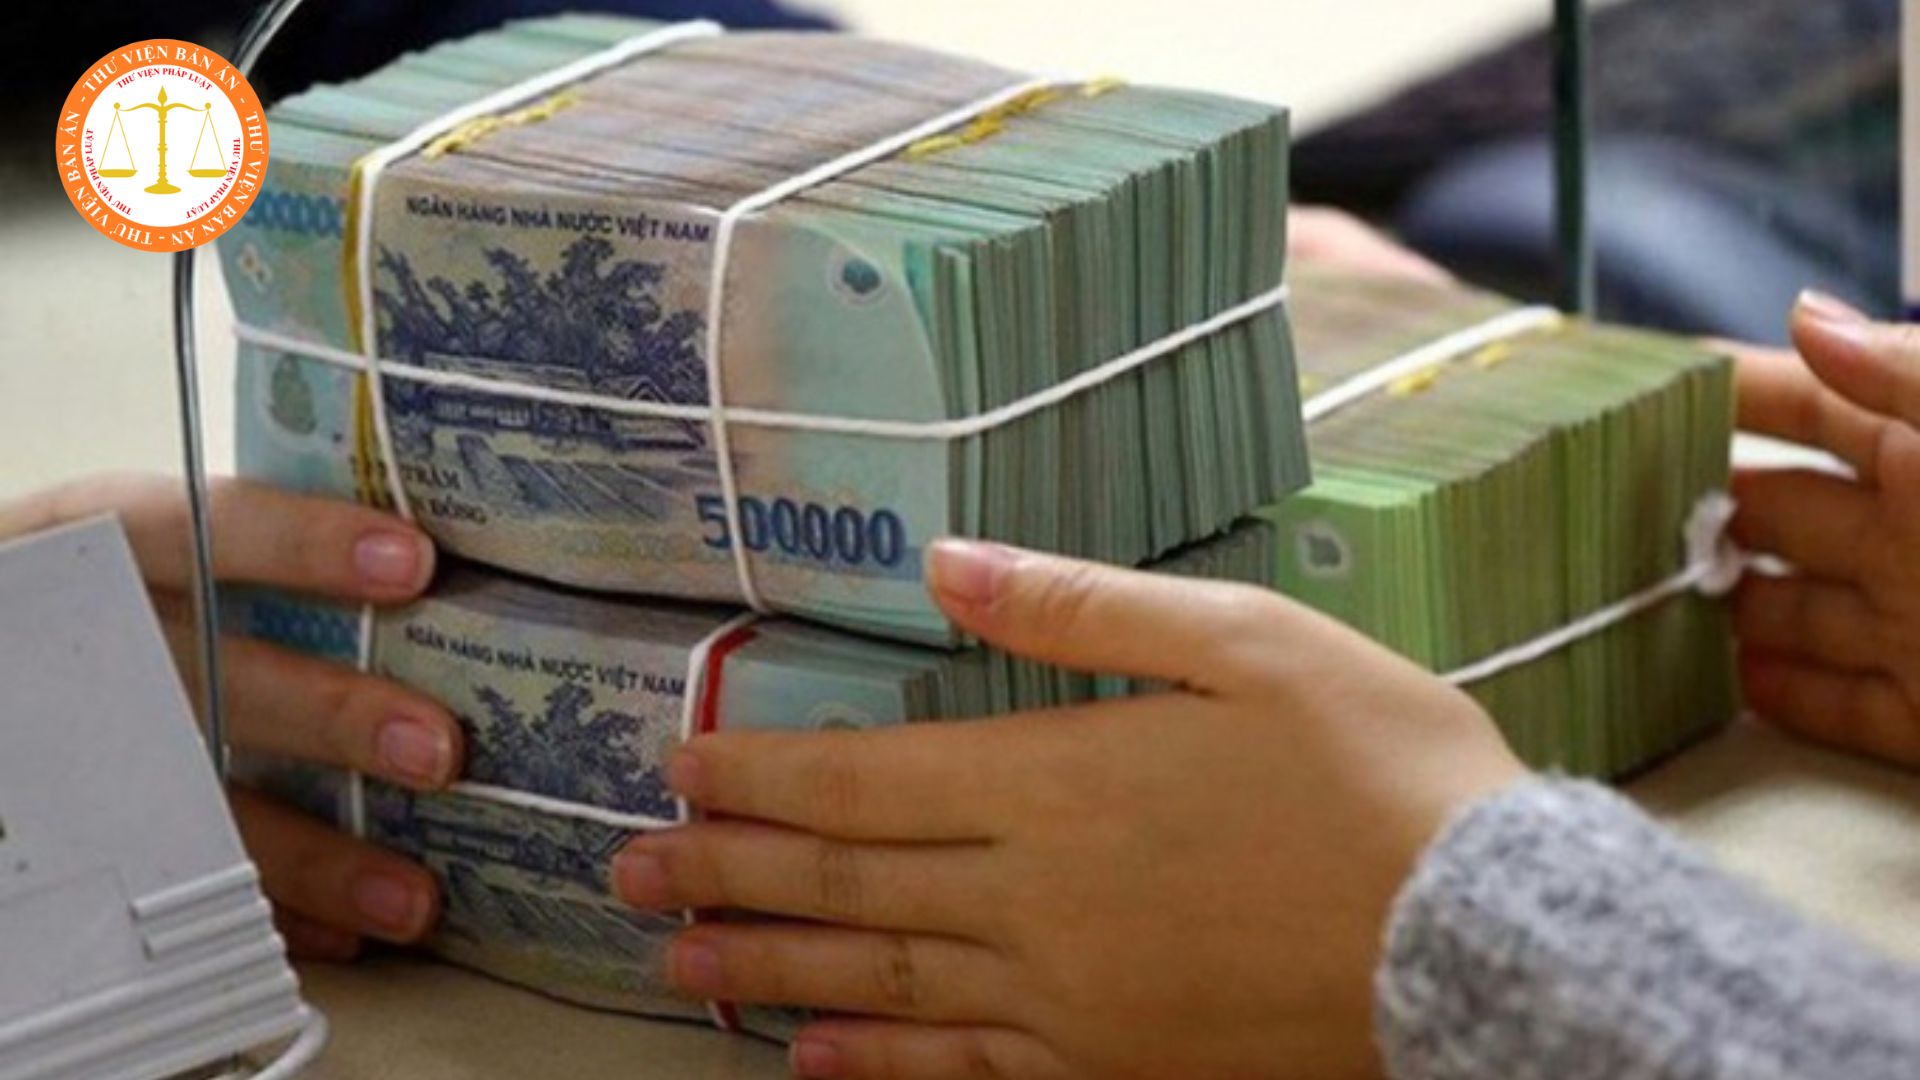 To reclaim the deposit that was appropriated by the Bank in Vietnam